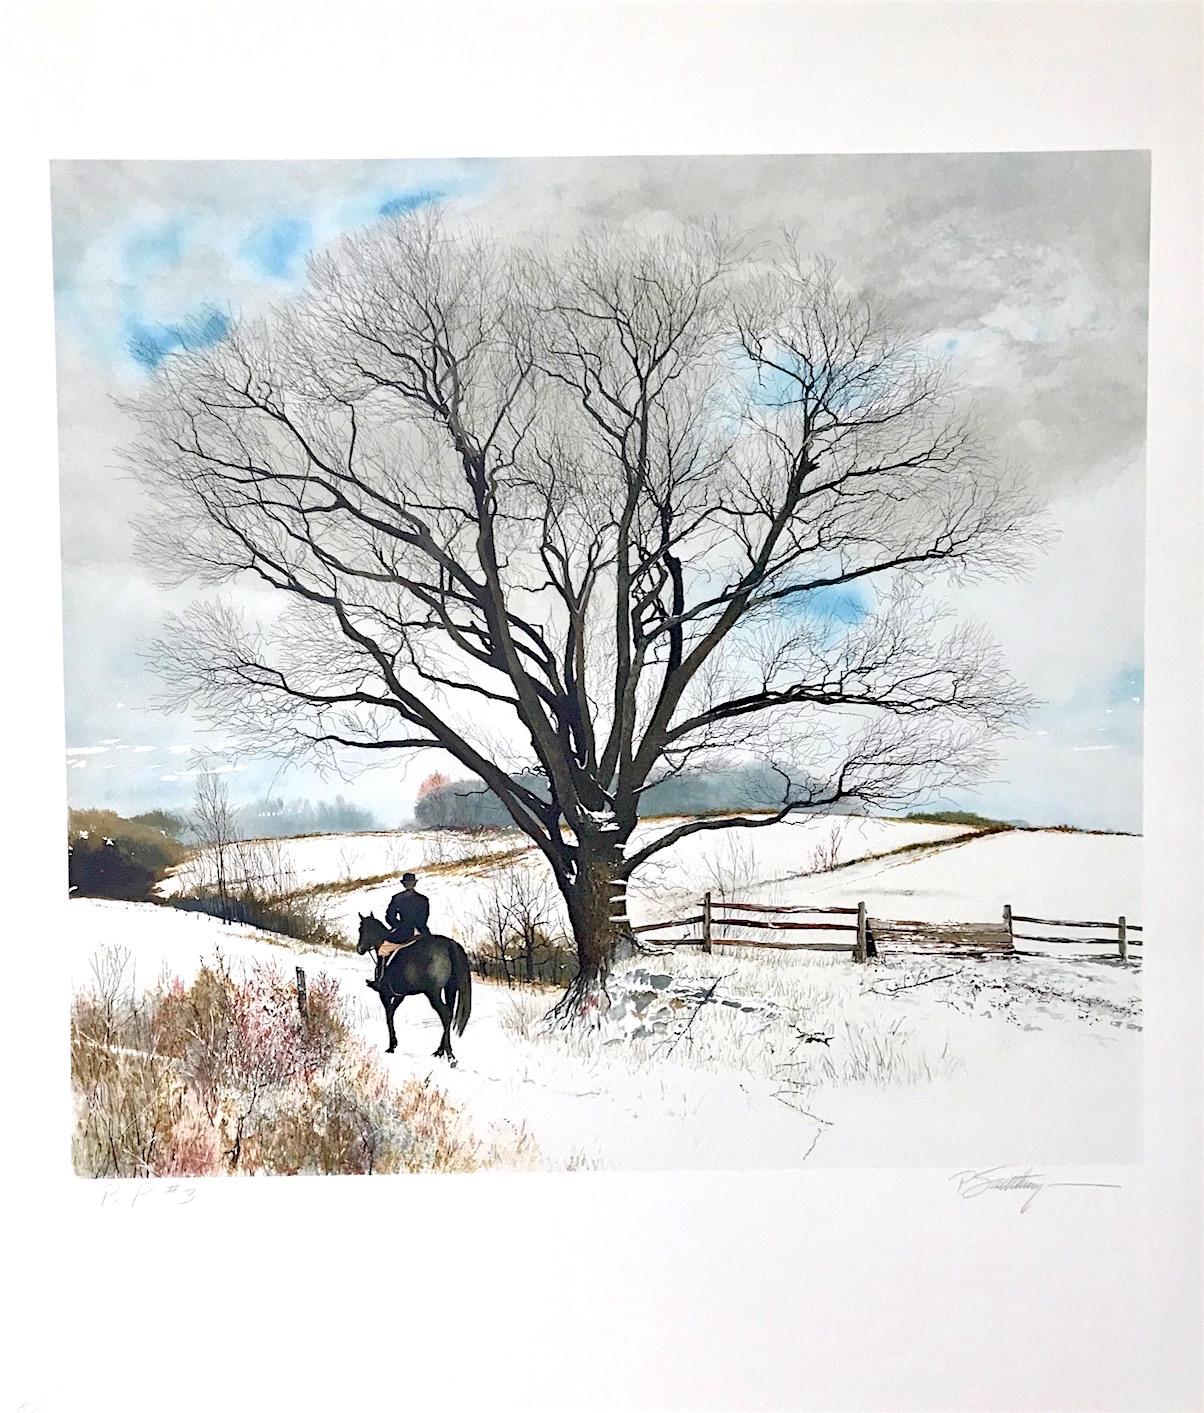 HILLTOPPER, Signed Limited Edition Lithograph, Equestrian English Riding - Print by Peter Sculthorpe